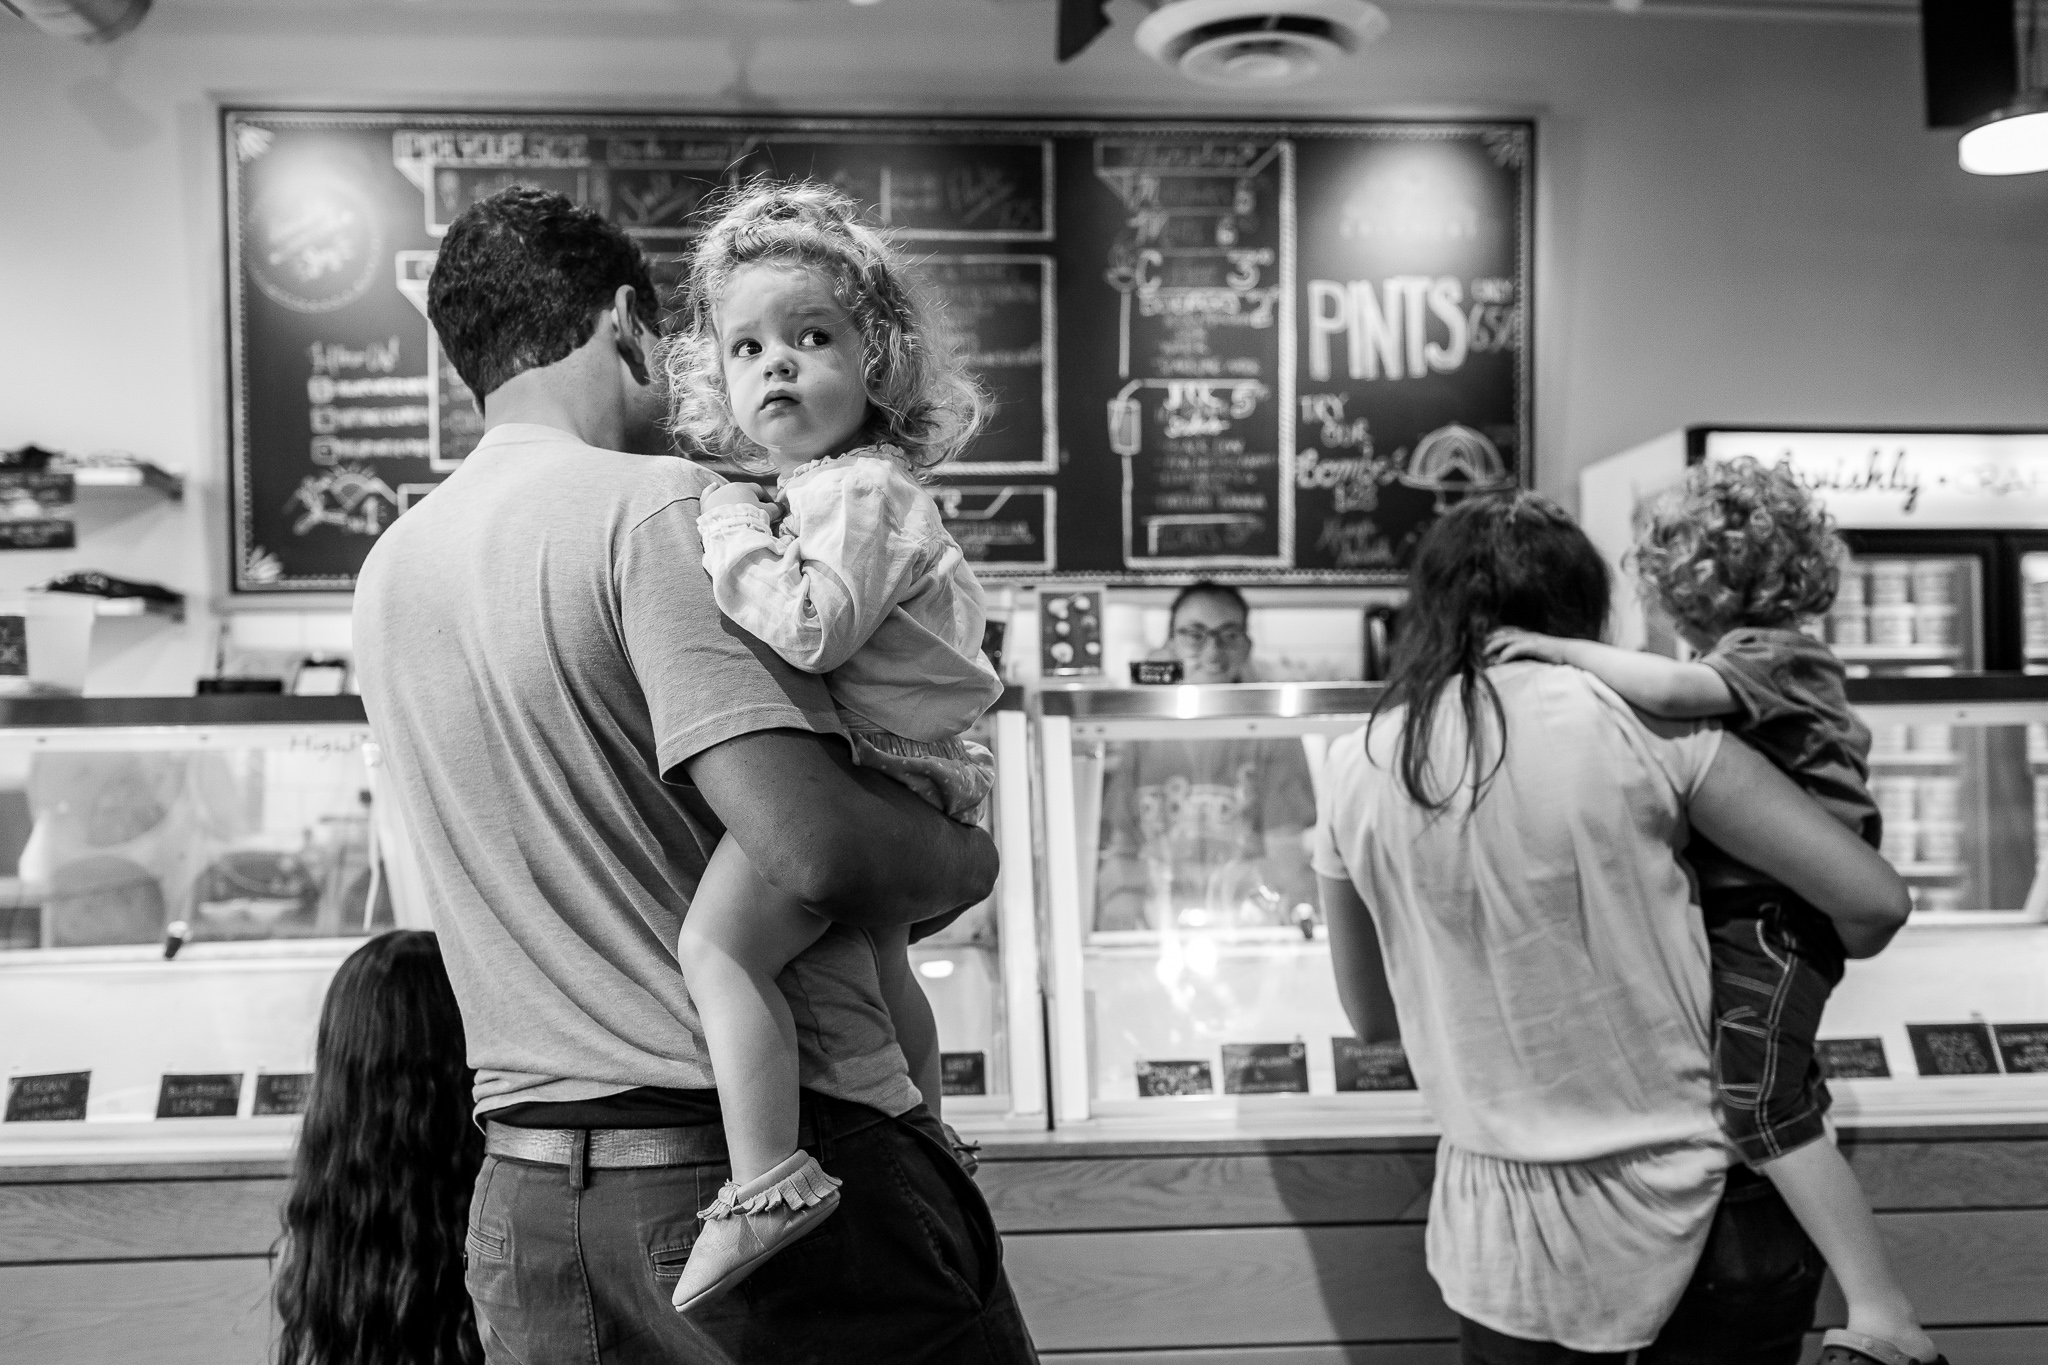 Colorado family photographer, Denver family photos ice cream, Denver family photojournalism, Documentary family photography, Family photojournalism, Day In the Life photography, In home photo session, Denver family photographer, Family photo ideas, …